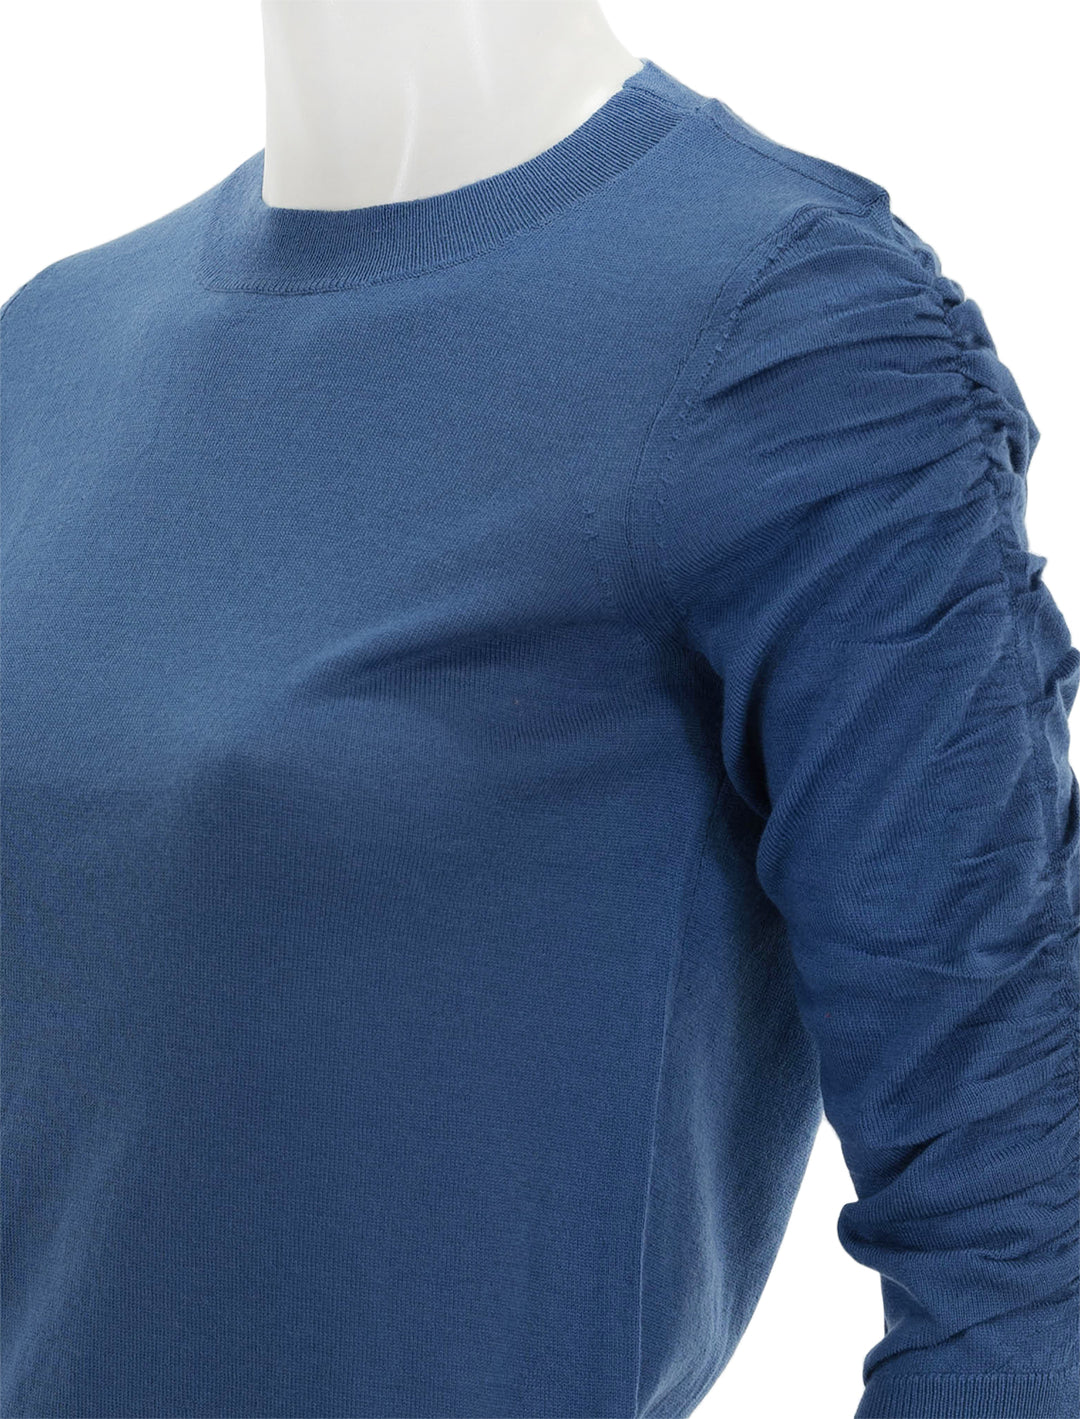 Close-up view of Veronica Beard's kase pullover in dark blue.